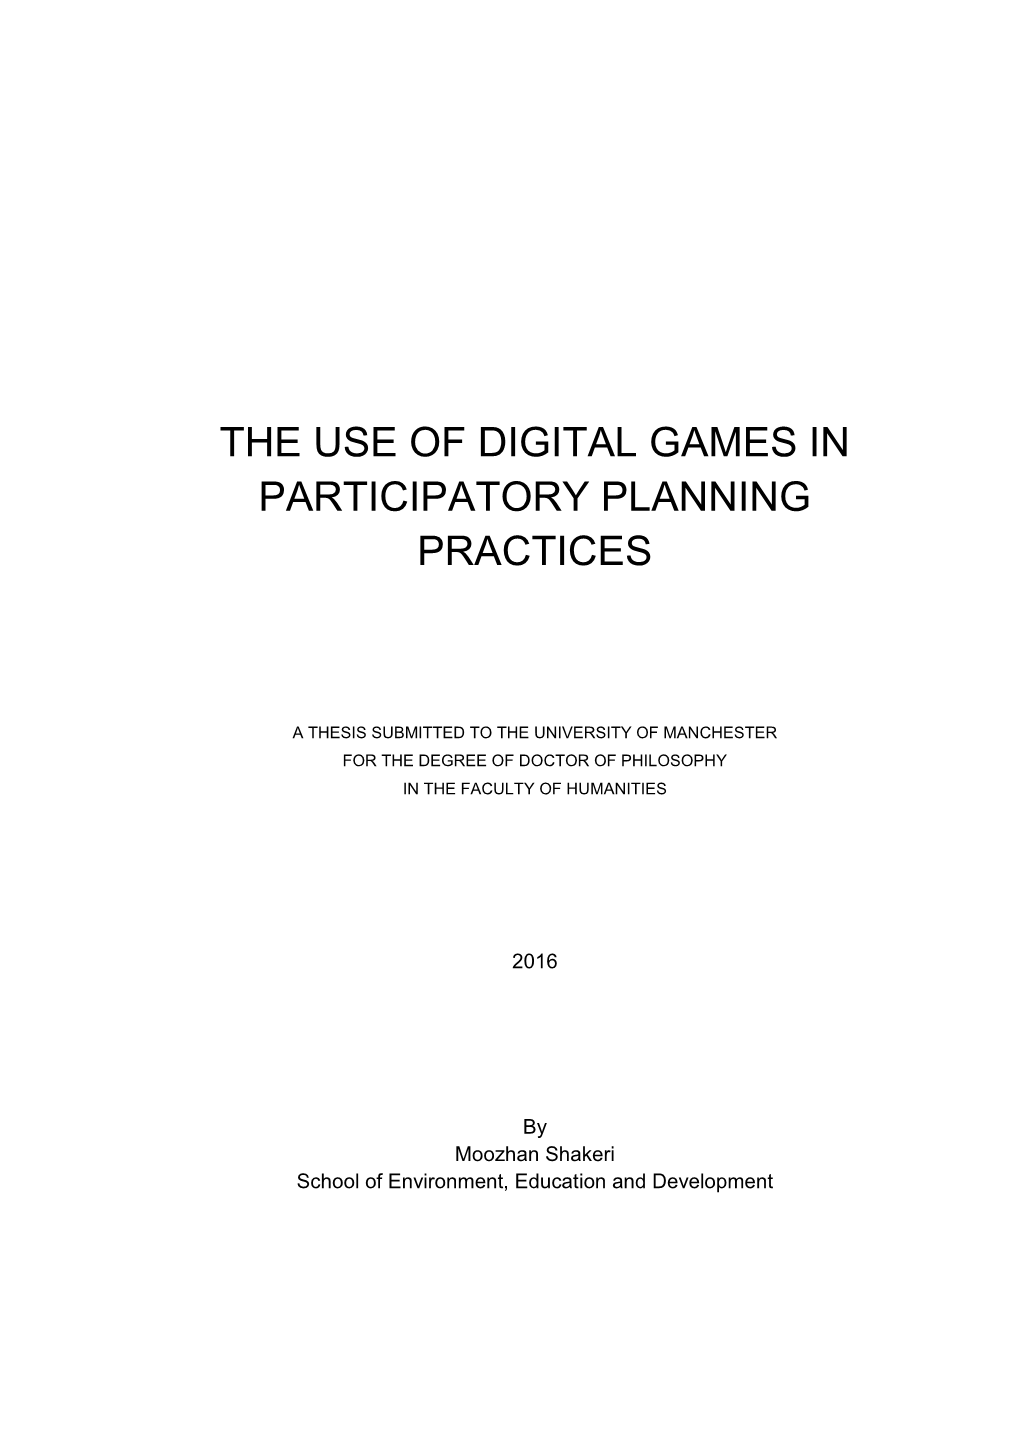 The Use of Digital Games in Participatory Planning Practices